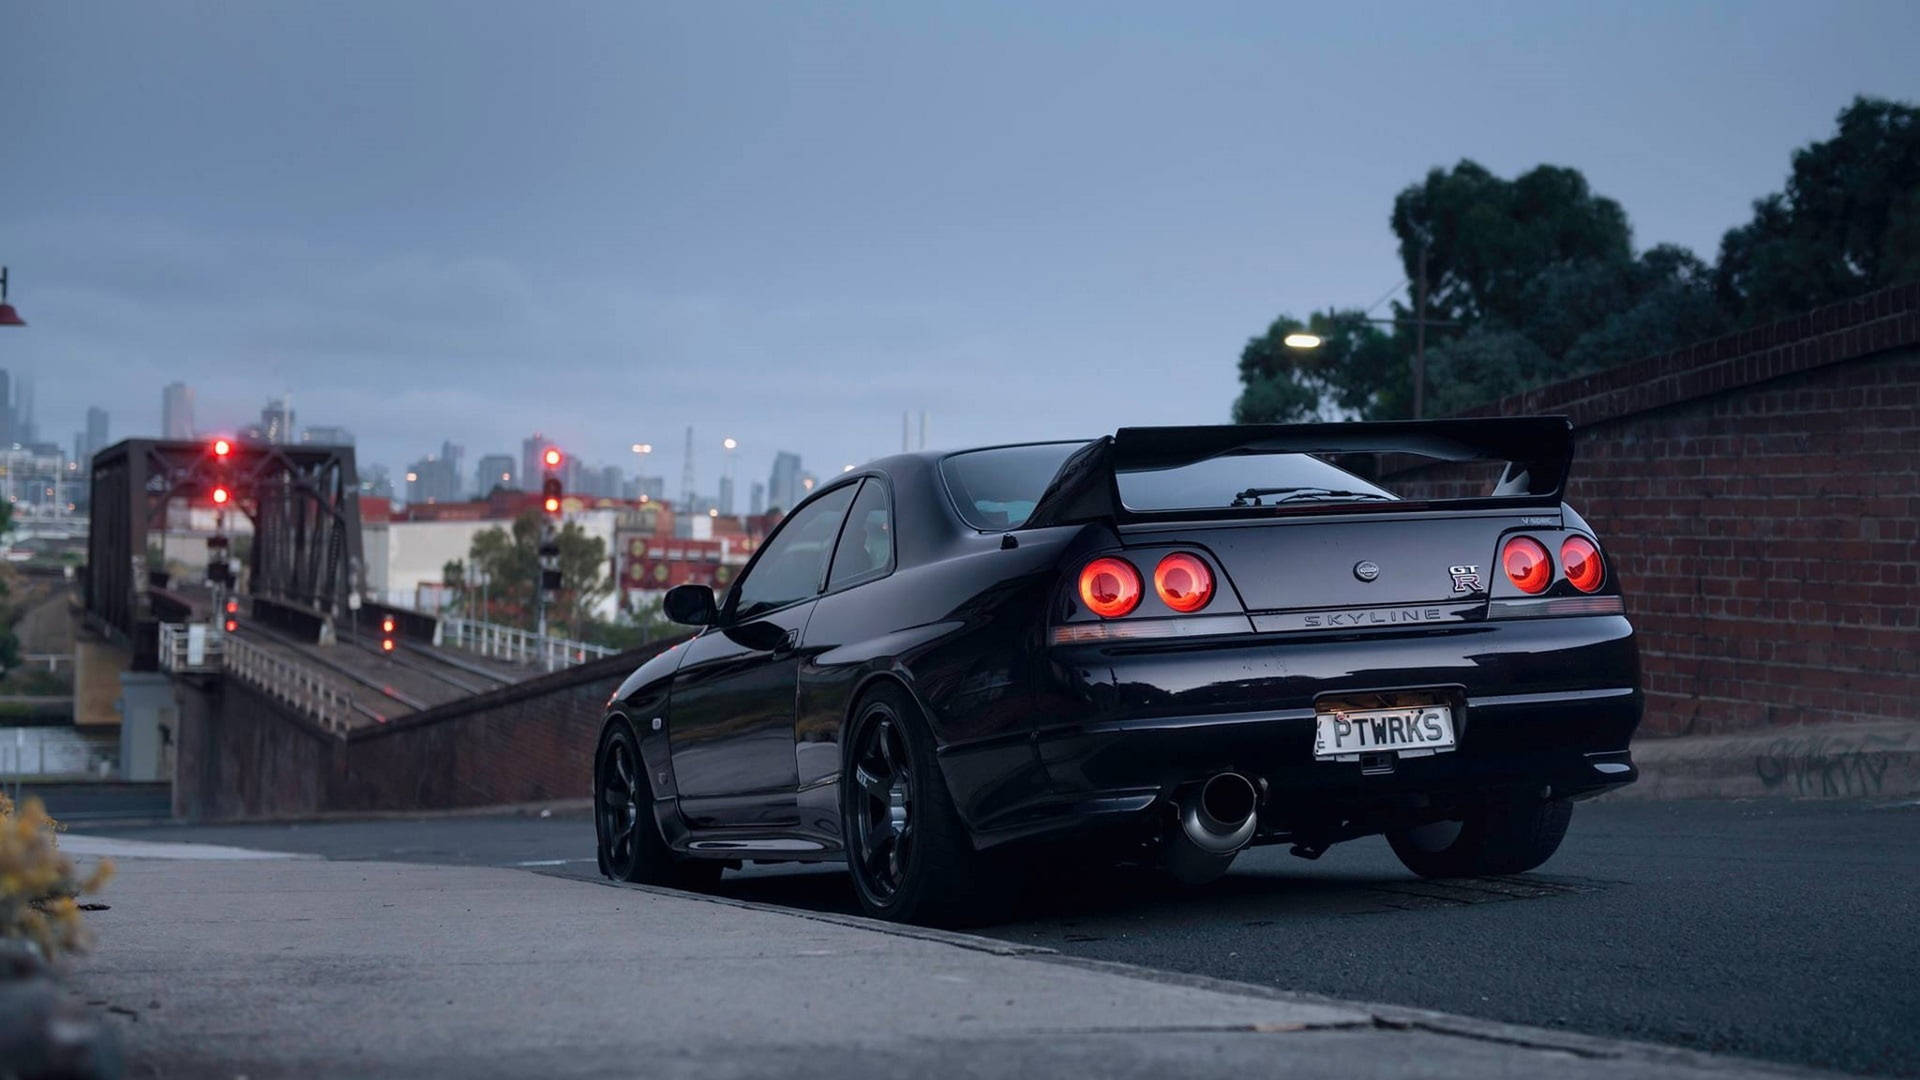 Nissan Skyline Gtr R33 In Its Magnificent Glory